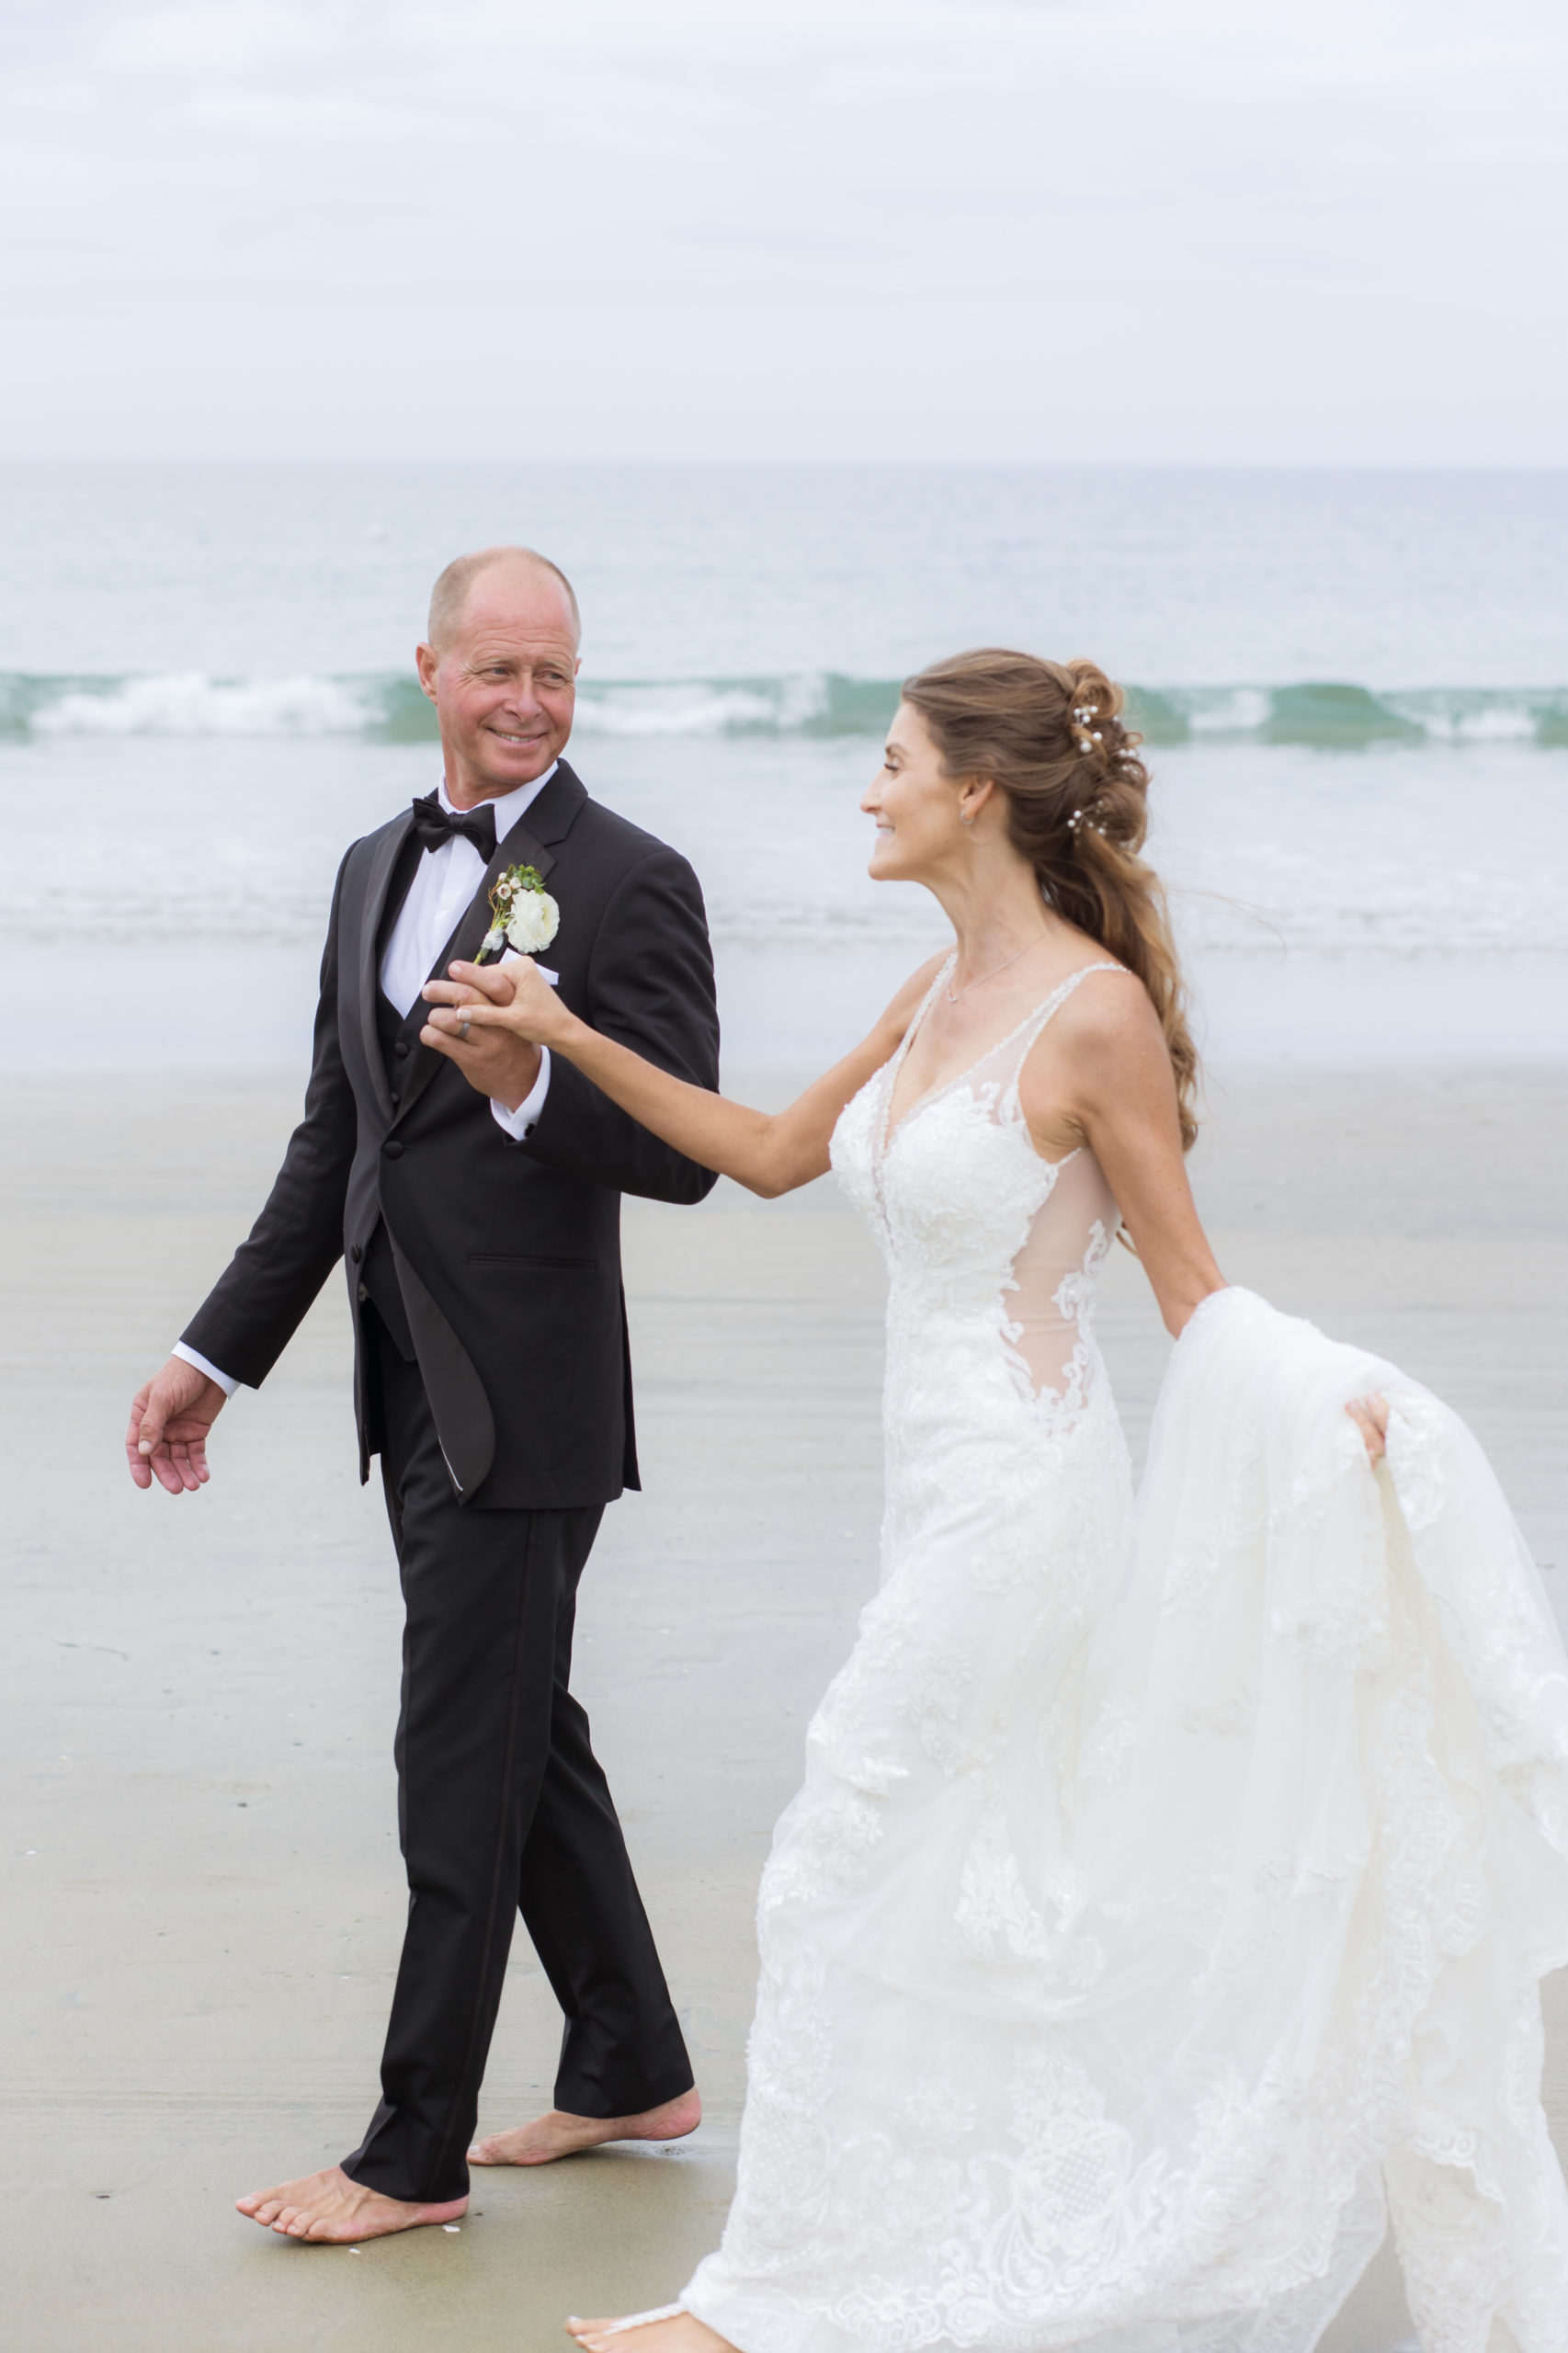 Bride and Groom walking along the beach at their Intimate La Jolla Shores Hotel Wedding